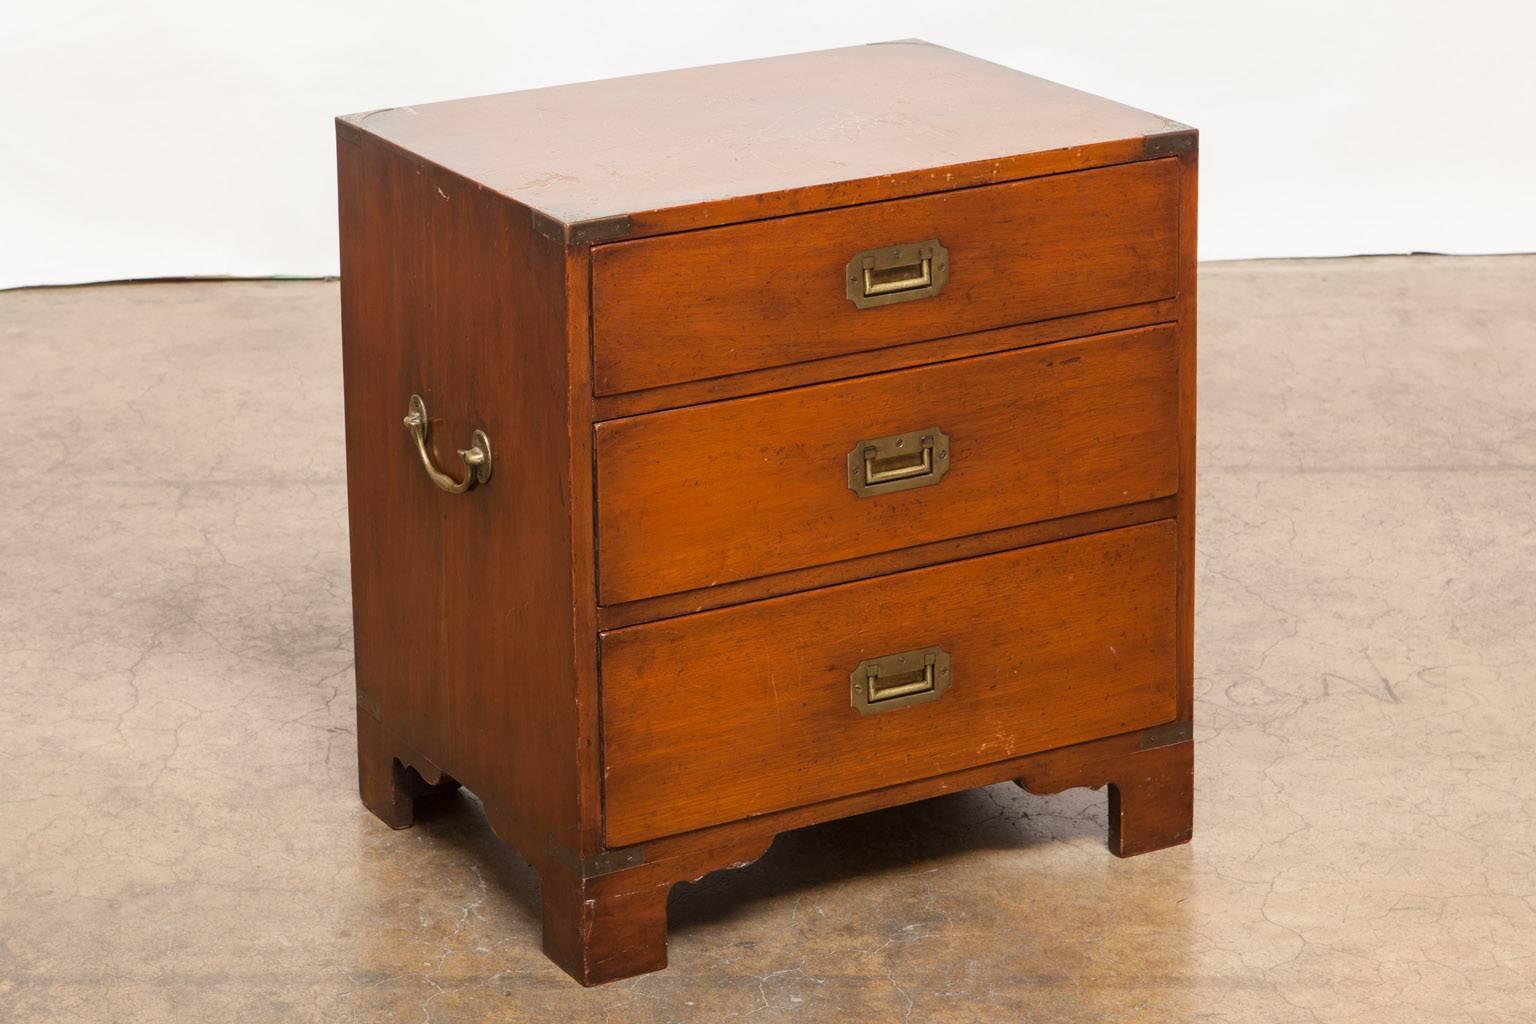 Diminutive English mahogany brass-mounted Campaign chest featuring three drawers with flush brass handles and larger handles on each side. This small chest of drawers or commode would make a great nightstand or bedside table. In found condition with